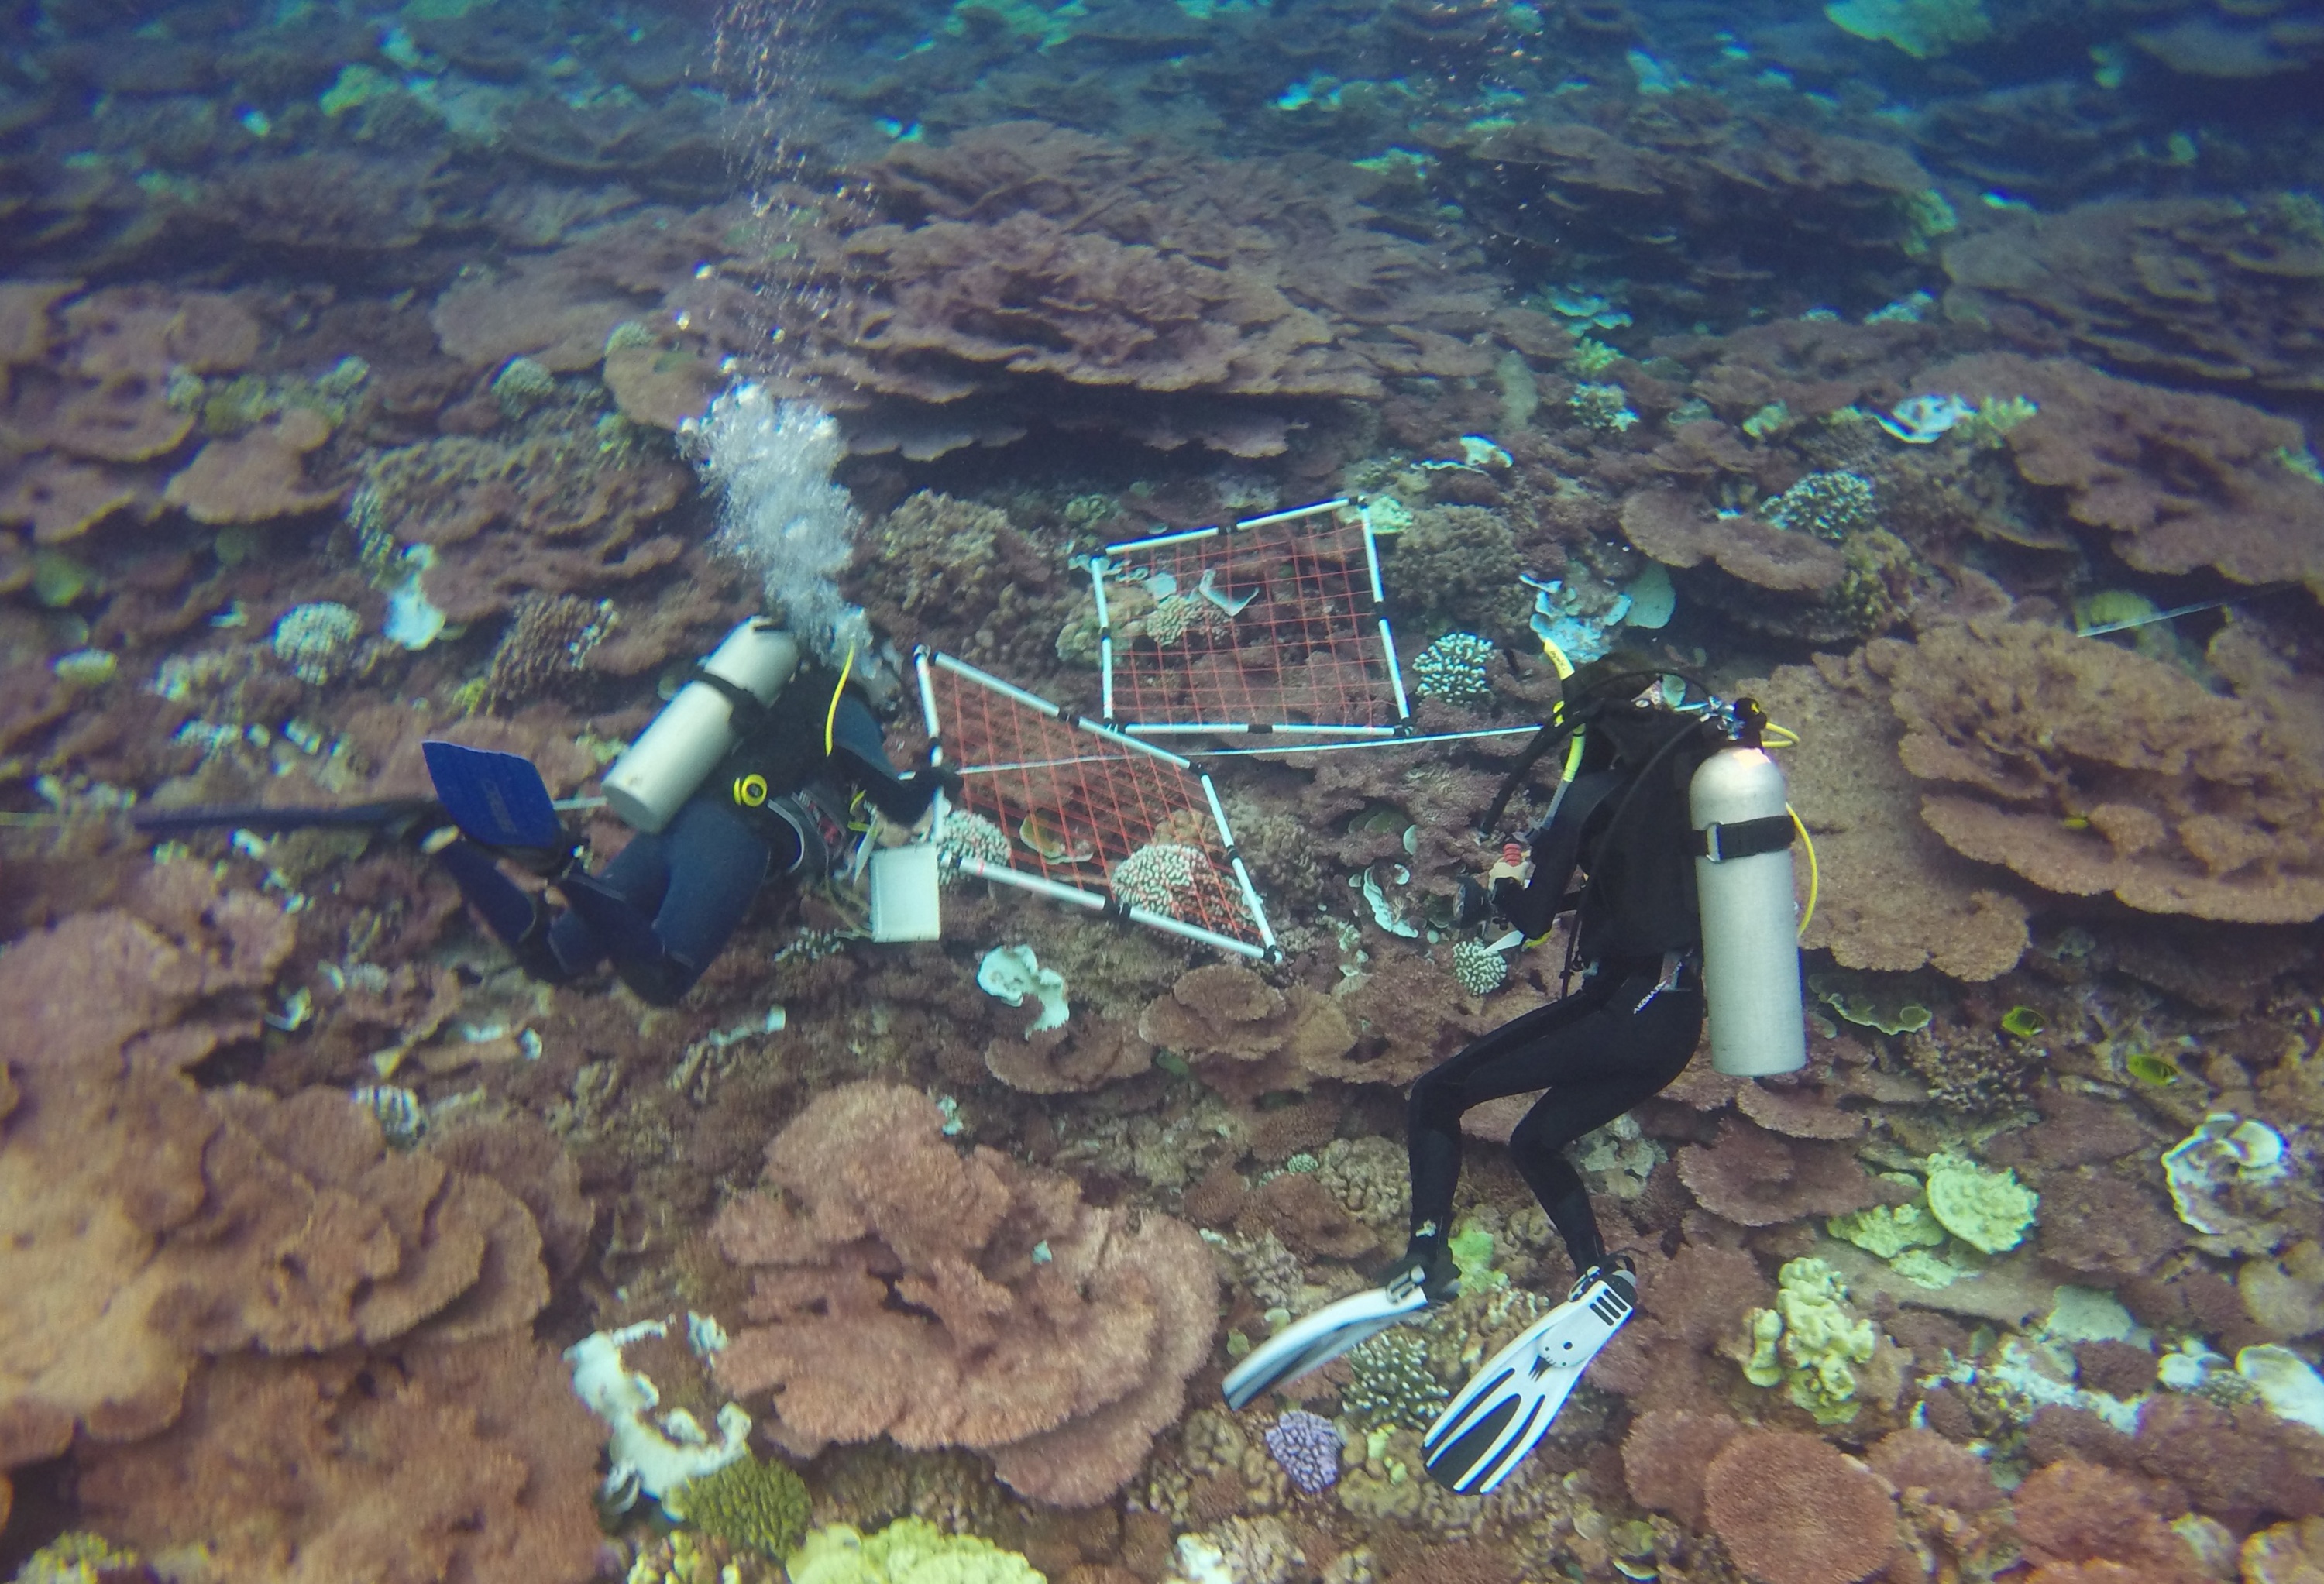 Georgia Tech graduate student Pamela Grothe performs benthic surveys in a field of dead Acropora coral colonies on a Christmas Island reef. (Credit: Kim Cobb, Georgia Tech)